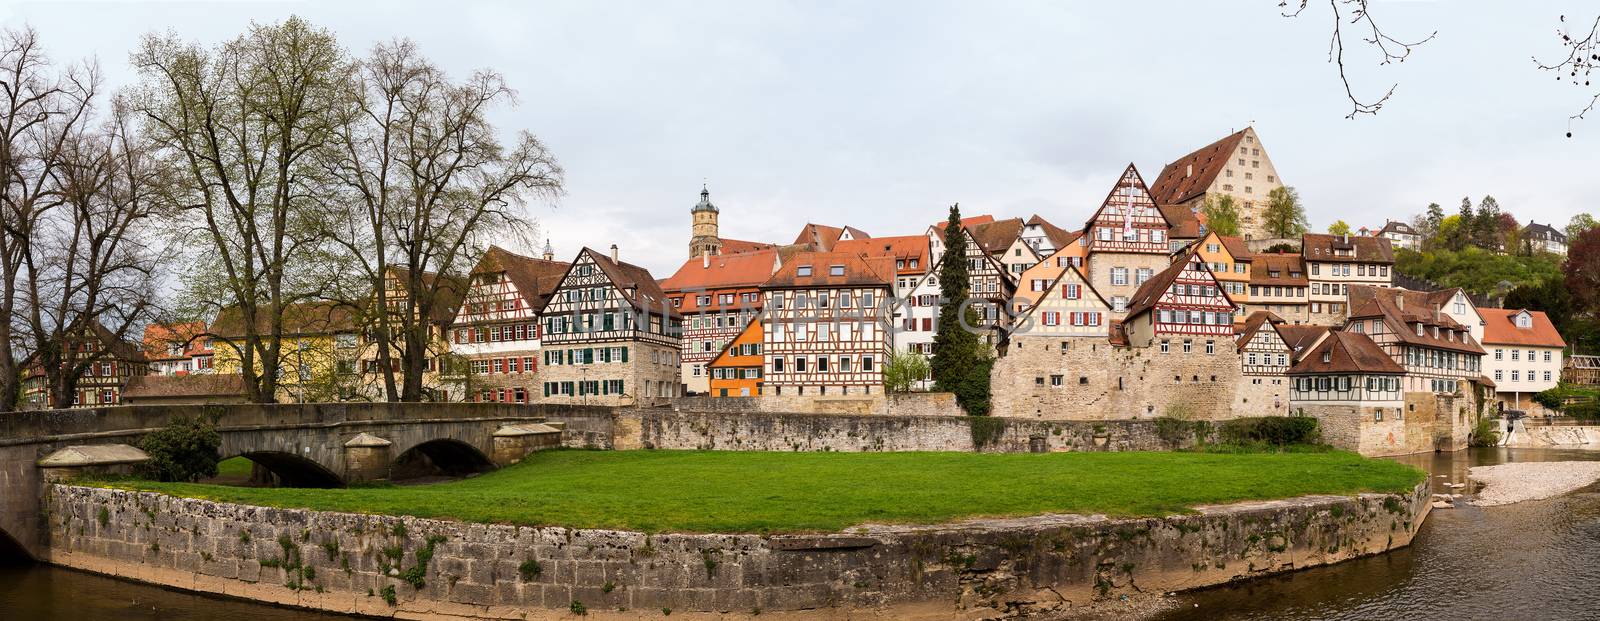 Panoramic view of the old town of Schwabisch Hall inside city walls and with the RIver Kocher running alongside the buildings.